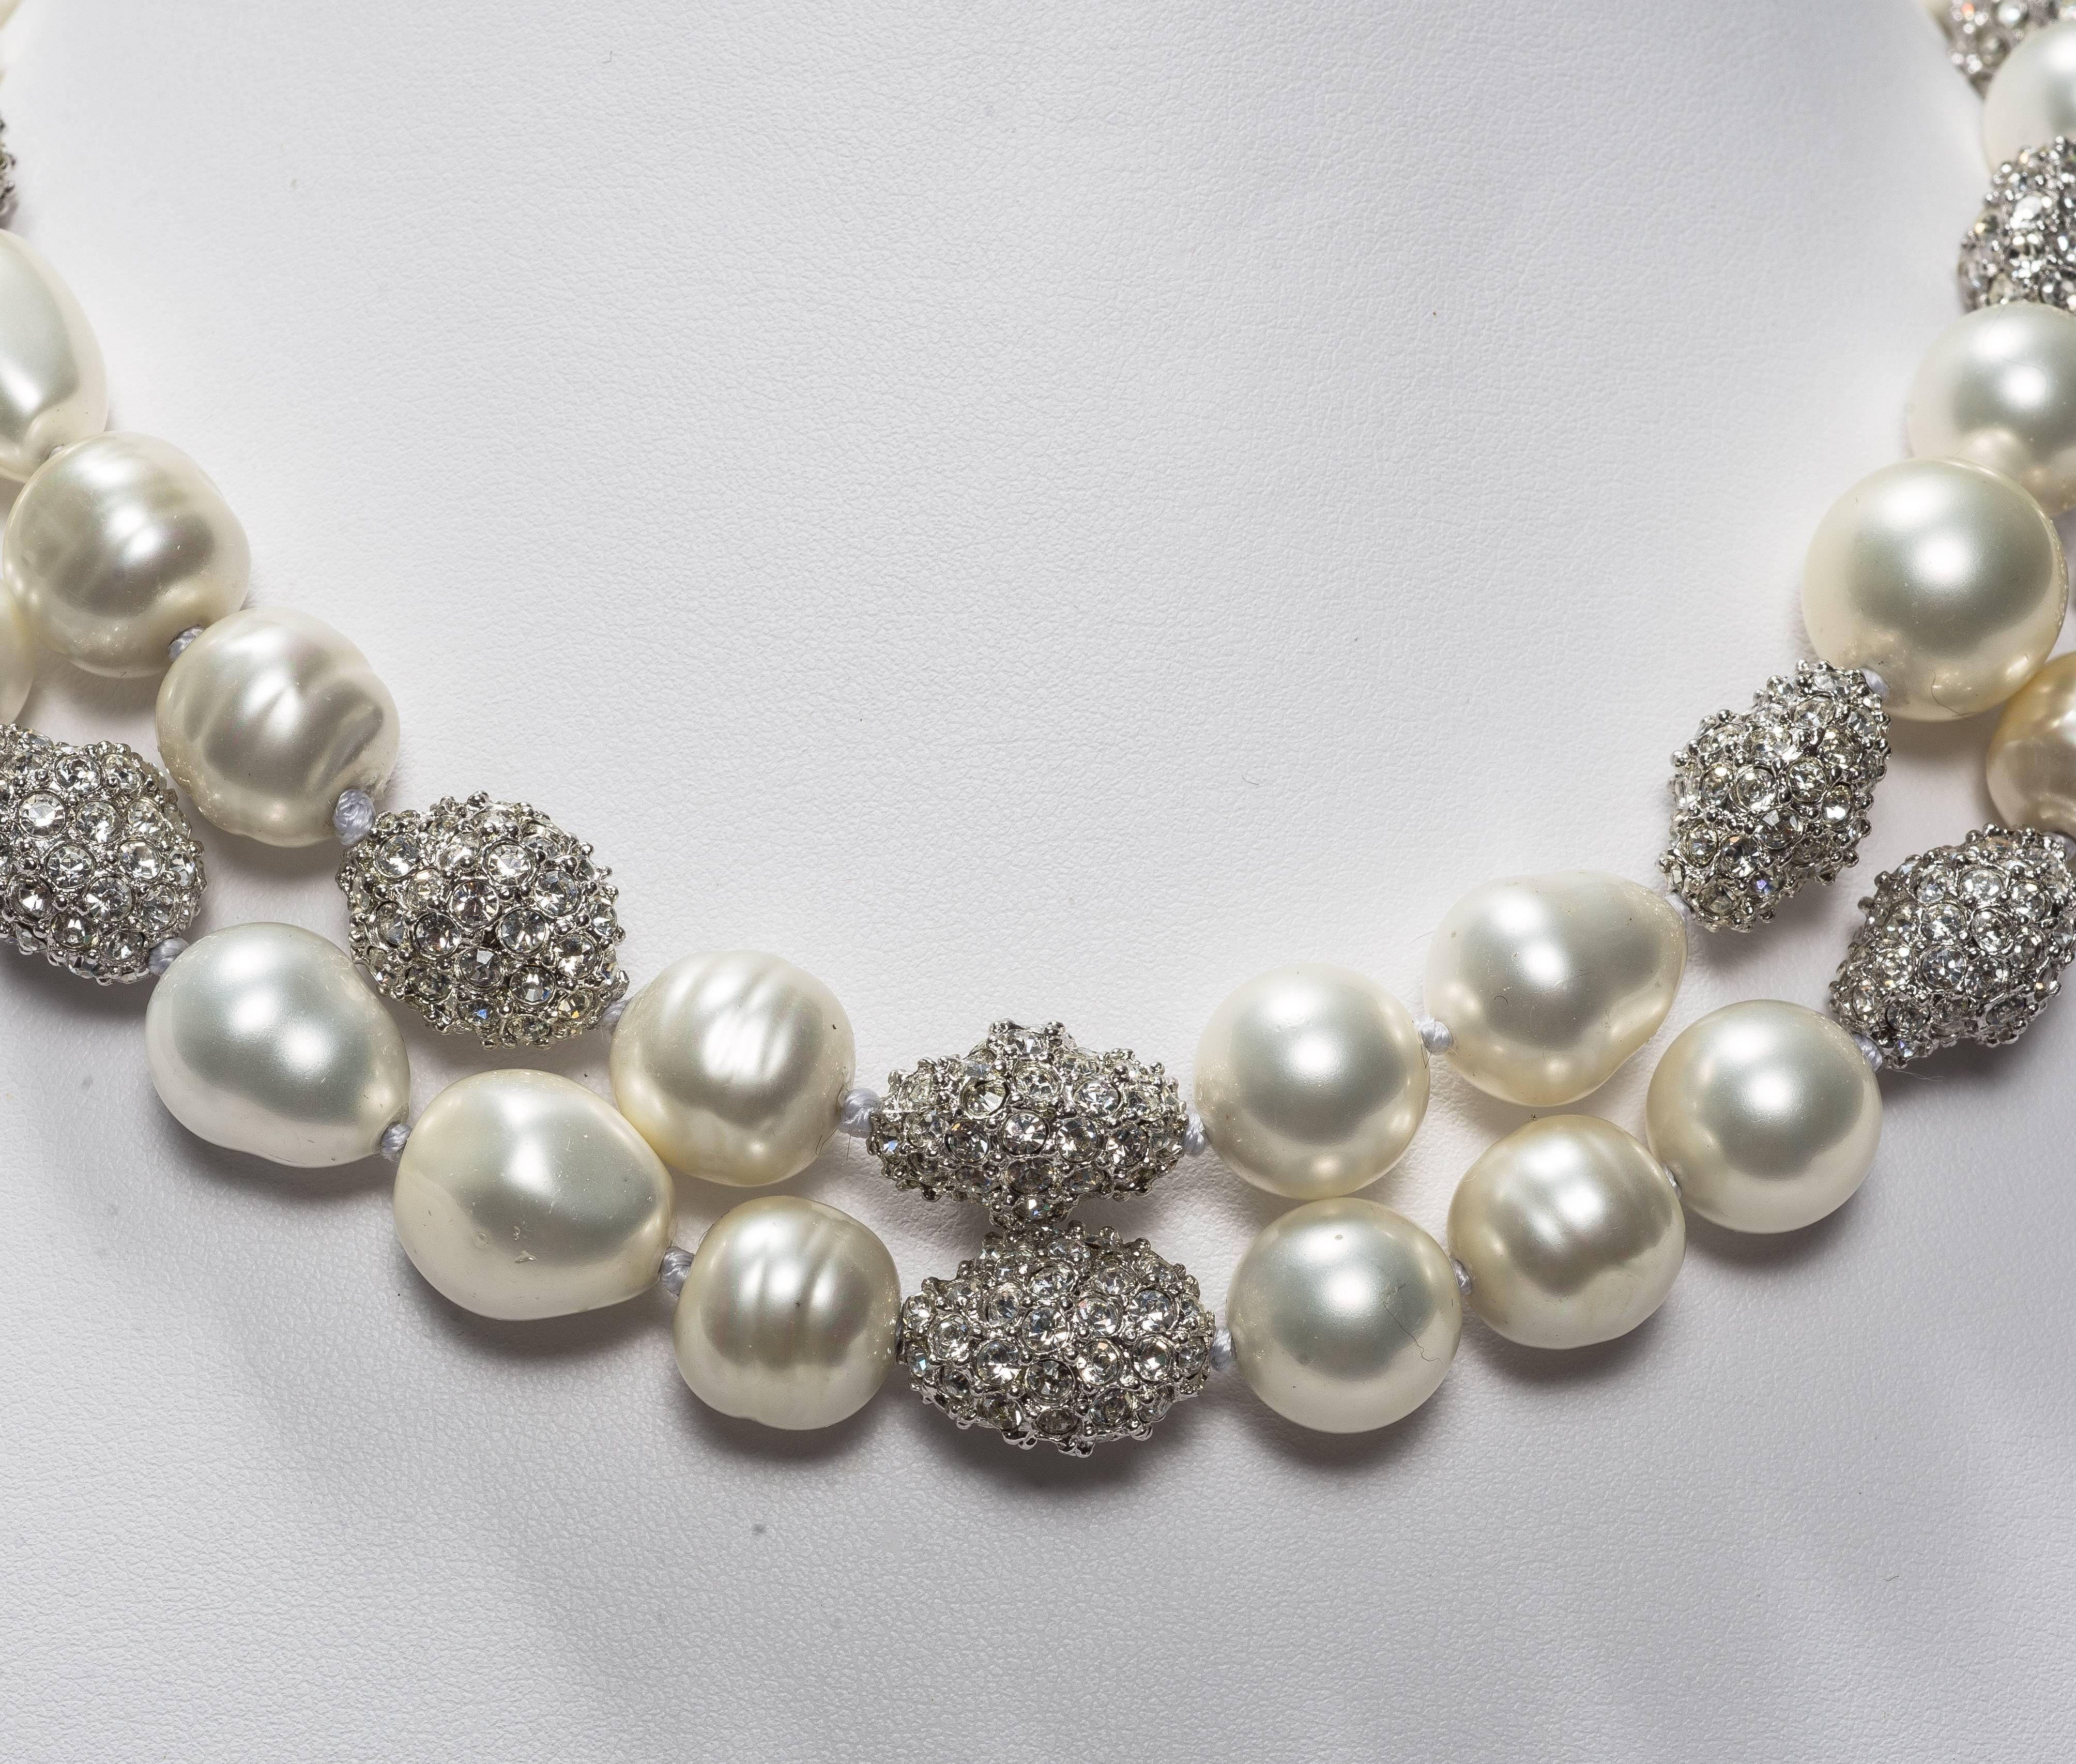 Vintage Bergdorf Goodman fabulous pave Swarovski crystal Japanese faux baroque glass pearl long necklace made in 1997. The pearls measure around 12mm and the 18 pave beads measure 3/4'' long. All hand silk knotted to a pave ball clasp. The necklace